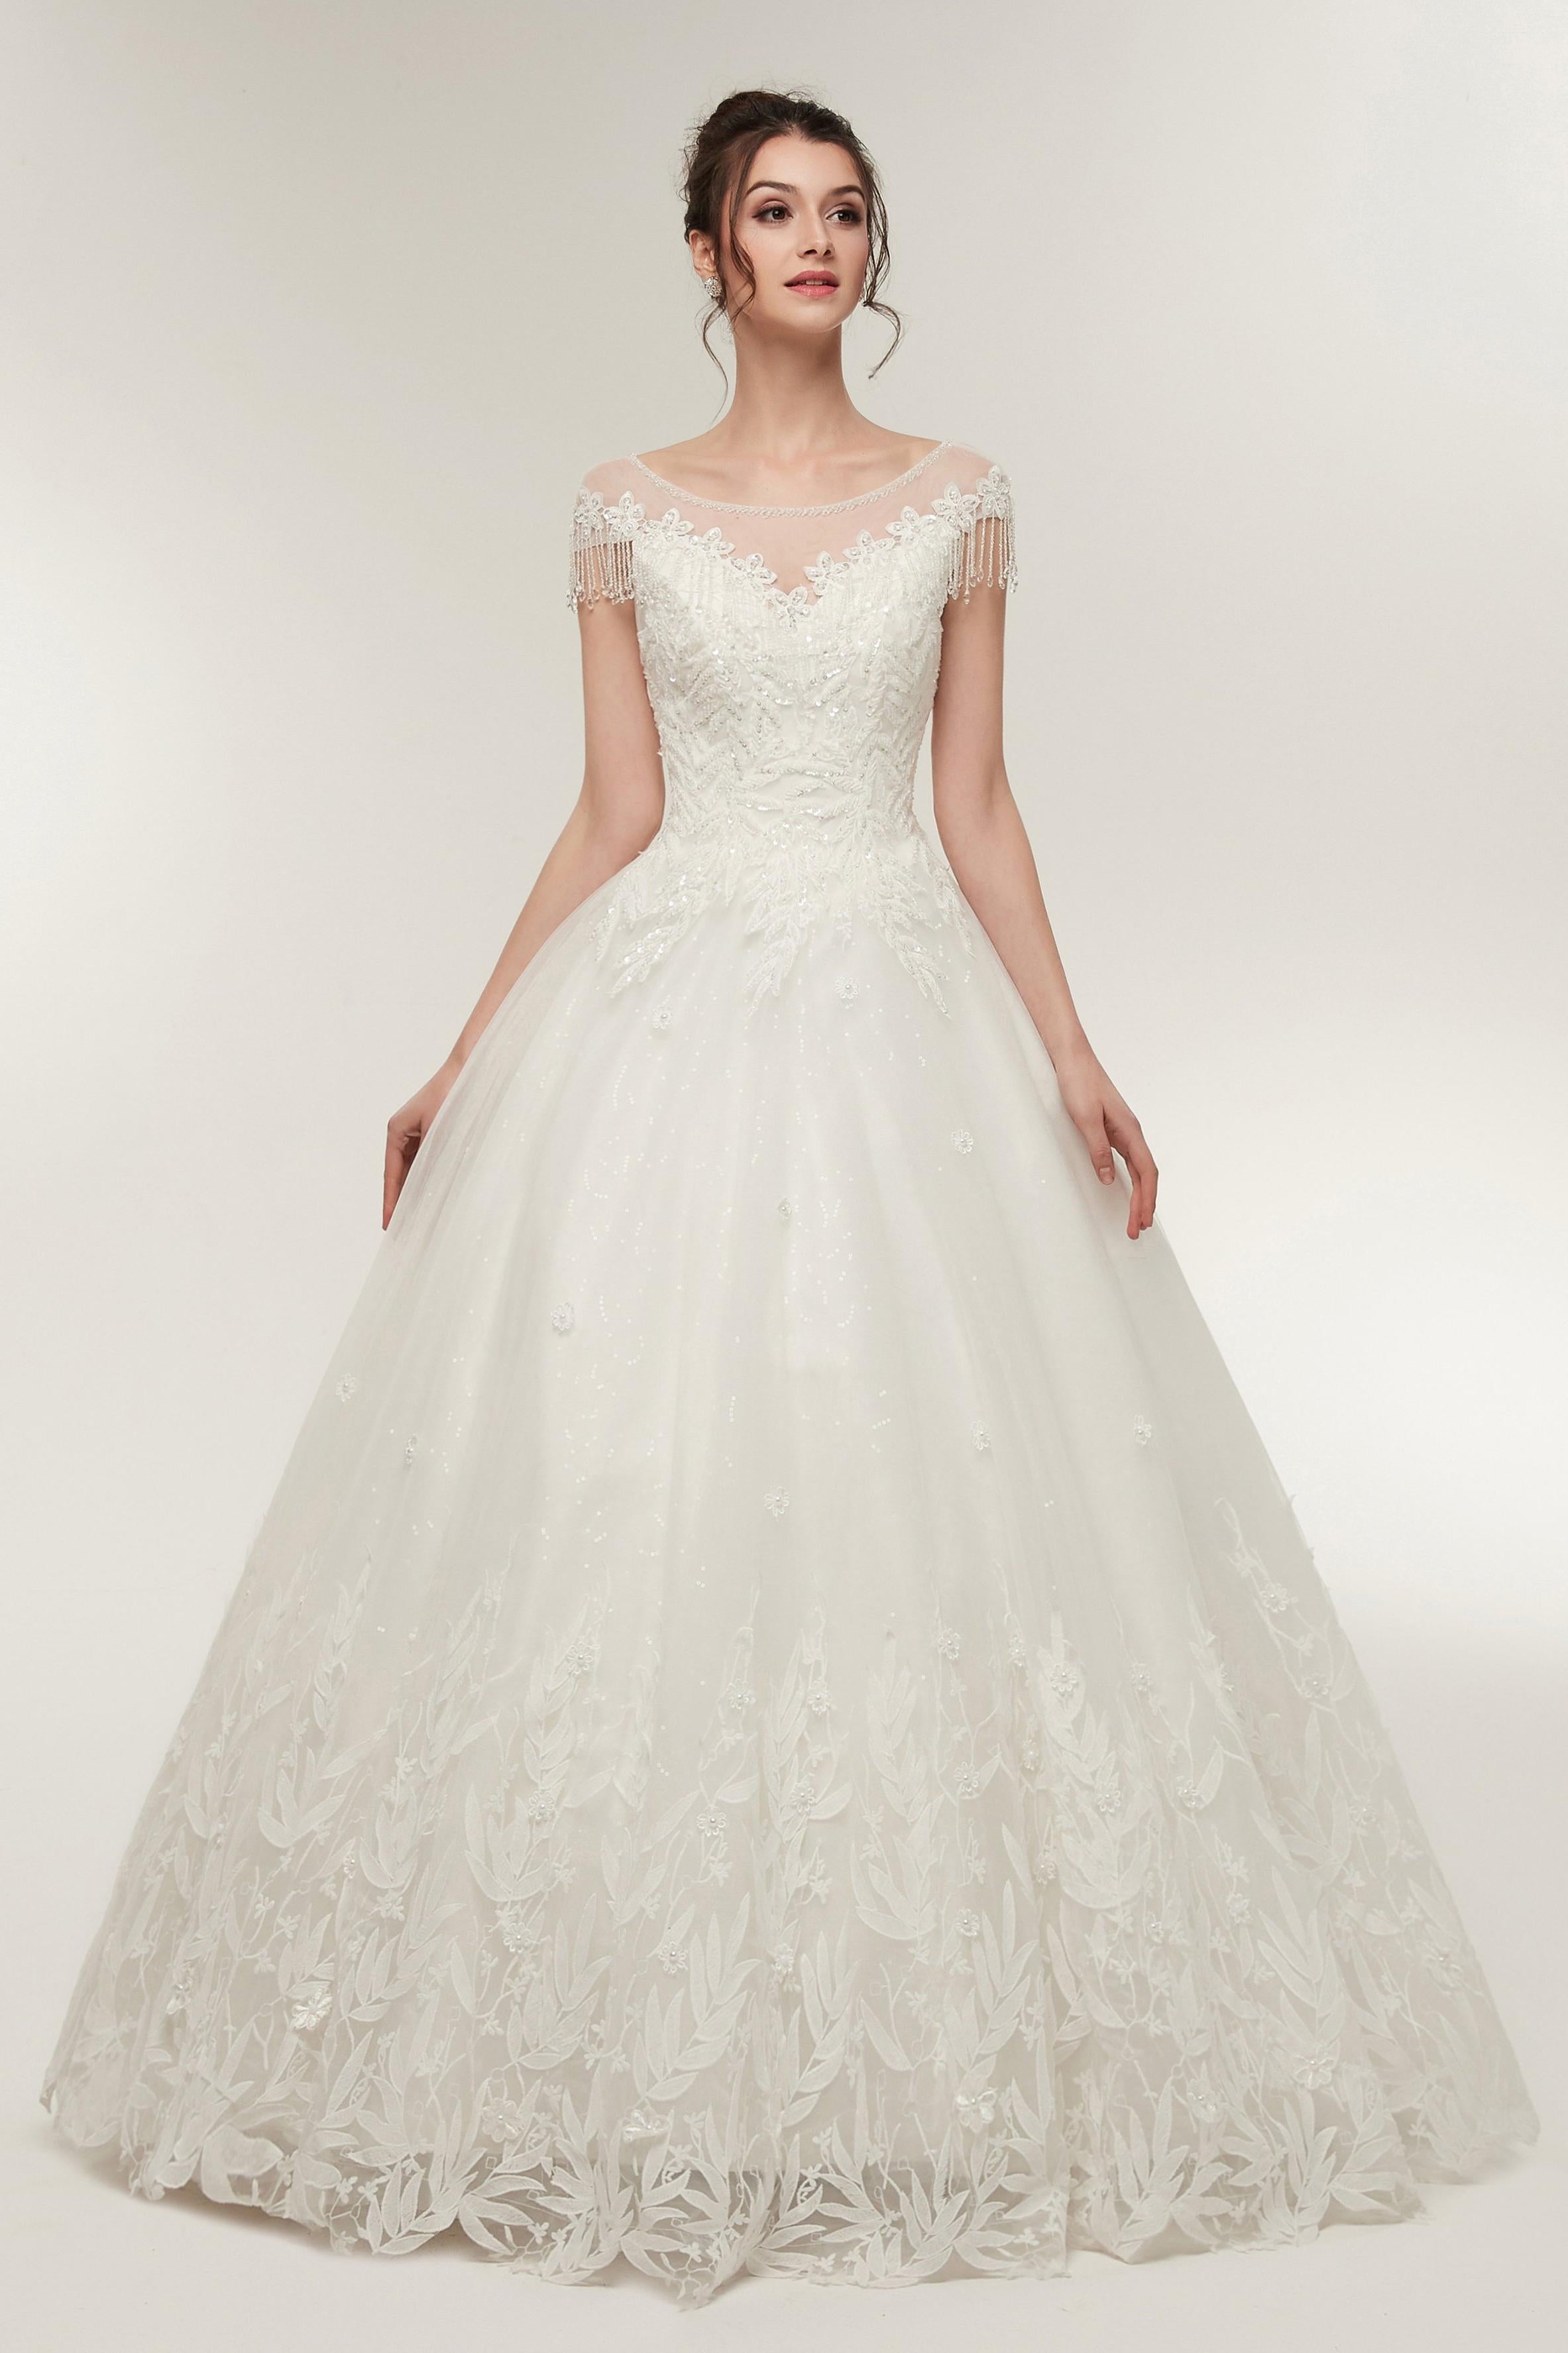 Elegant Princess White Cap Sleeve Tulle Wedding Dresses With Lace Appliques